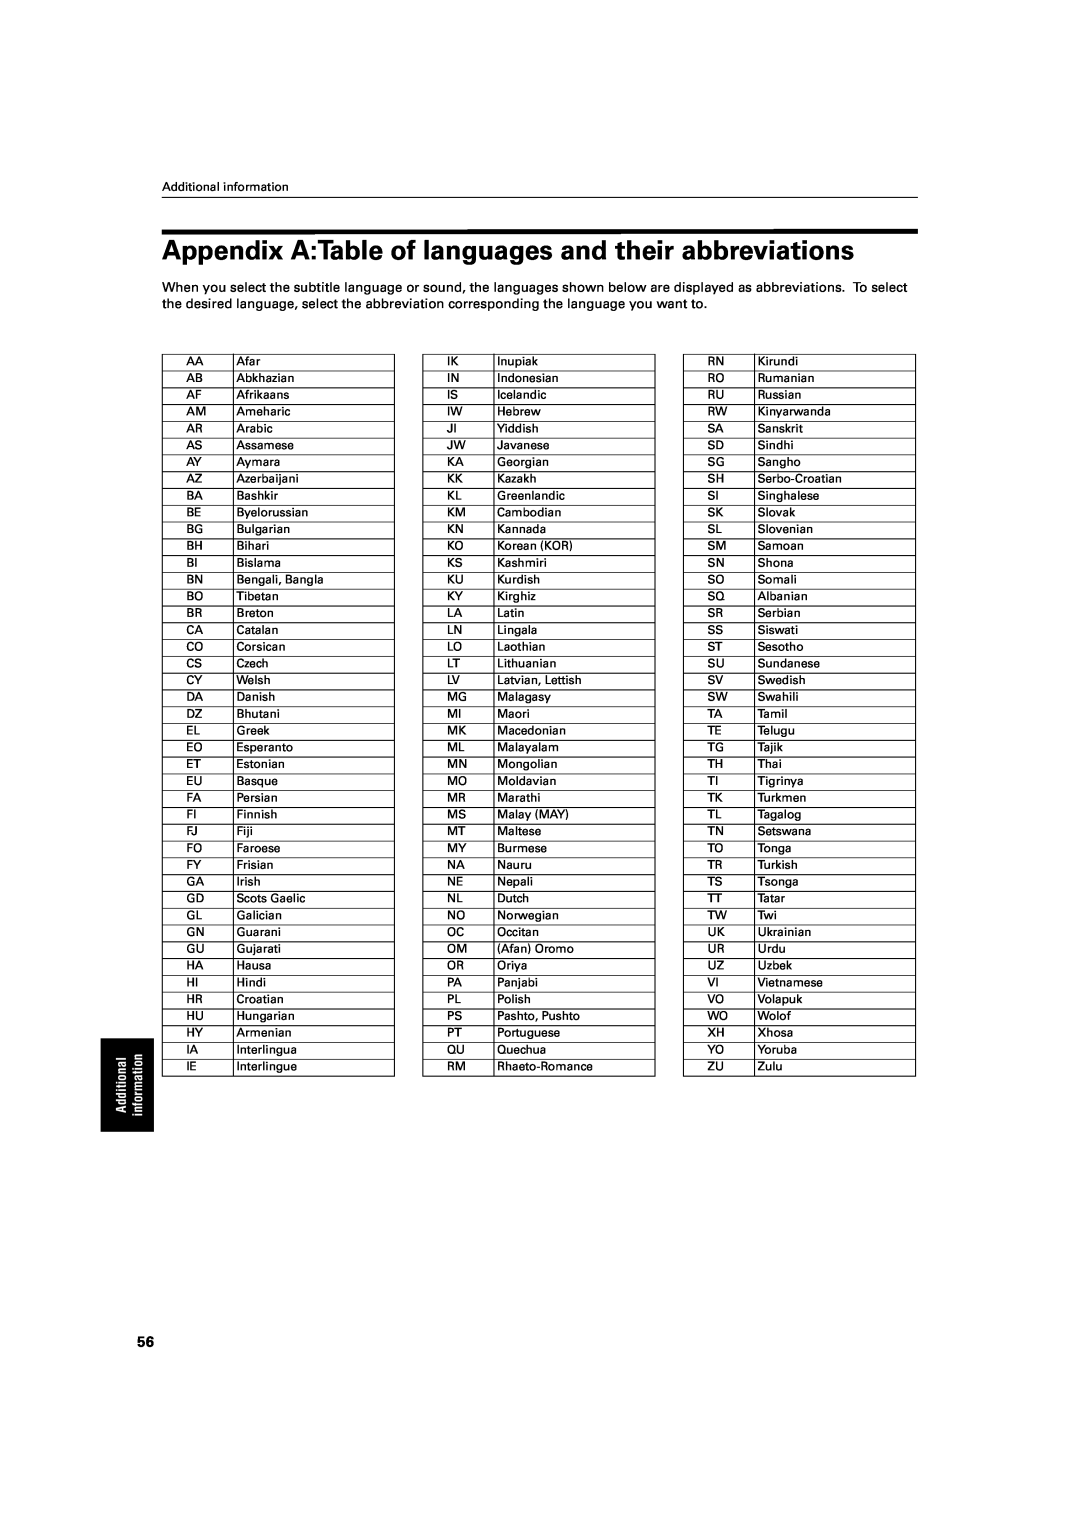 JVC XV-S60 manual Appendix ATable of languages and their abbreviations, Additional, information 